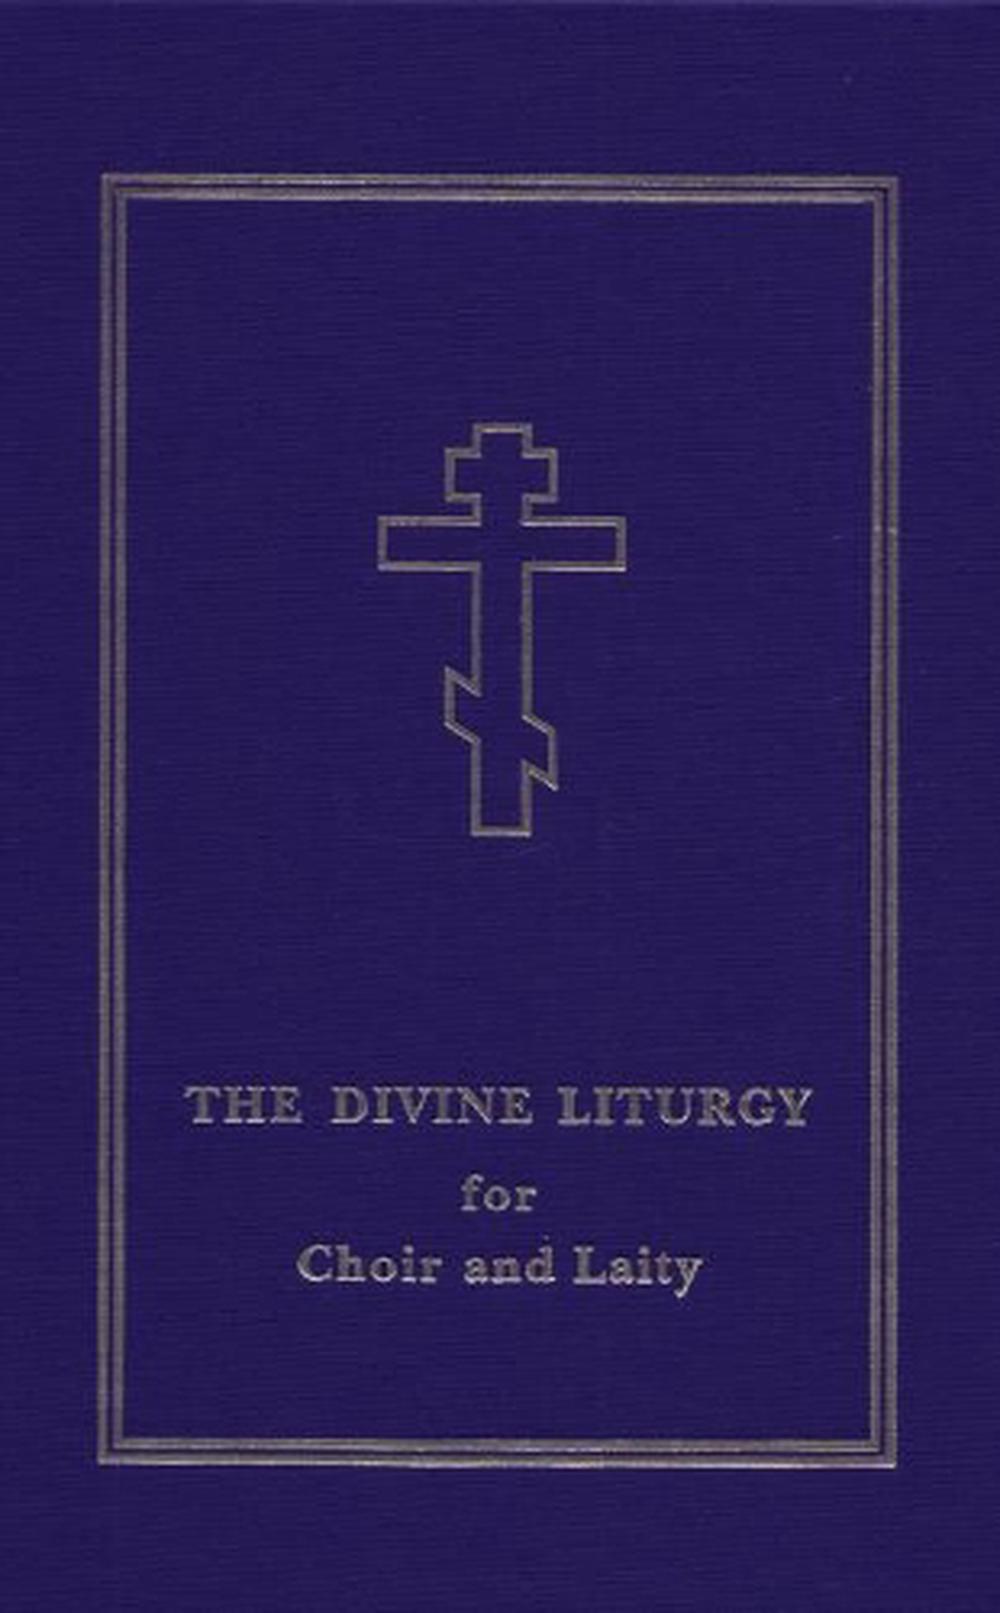 The Divine Liturgy for Choir and Laity by The Orthodox Church (English) Hardcove 9780884651185